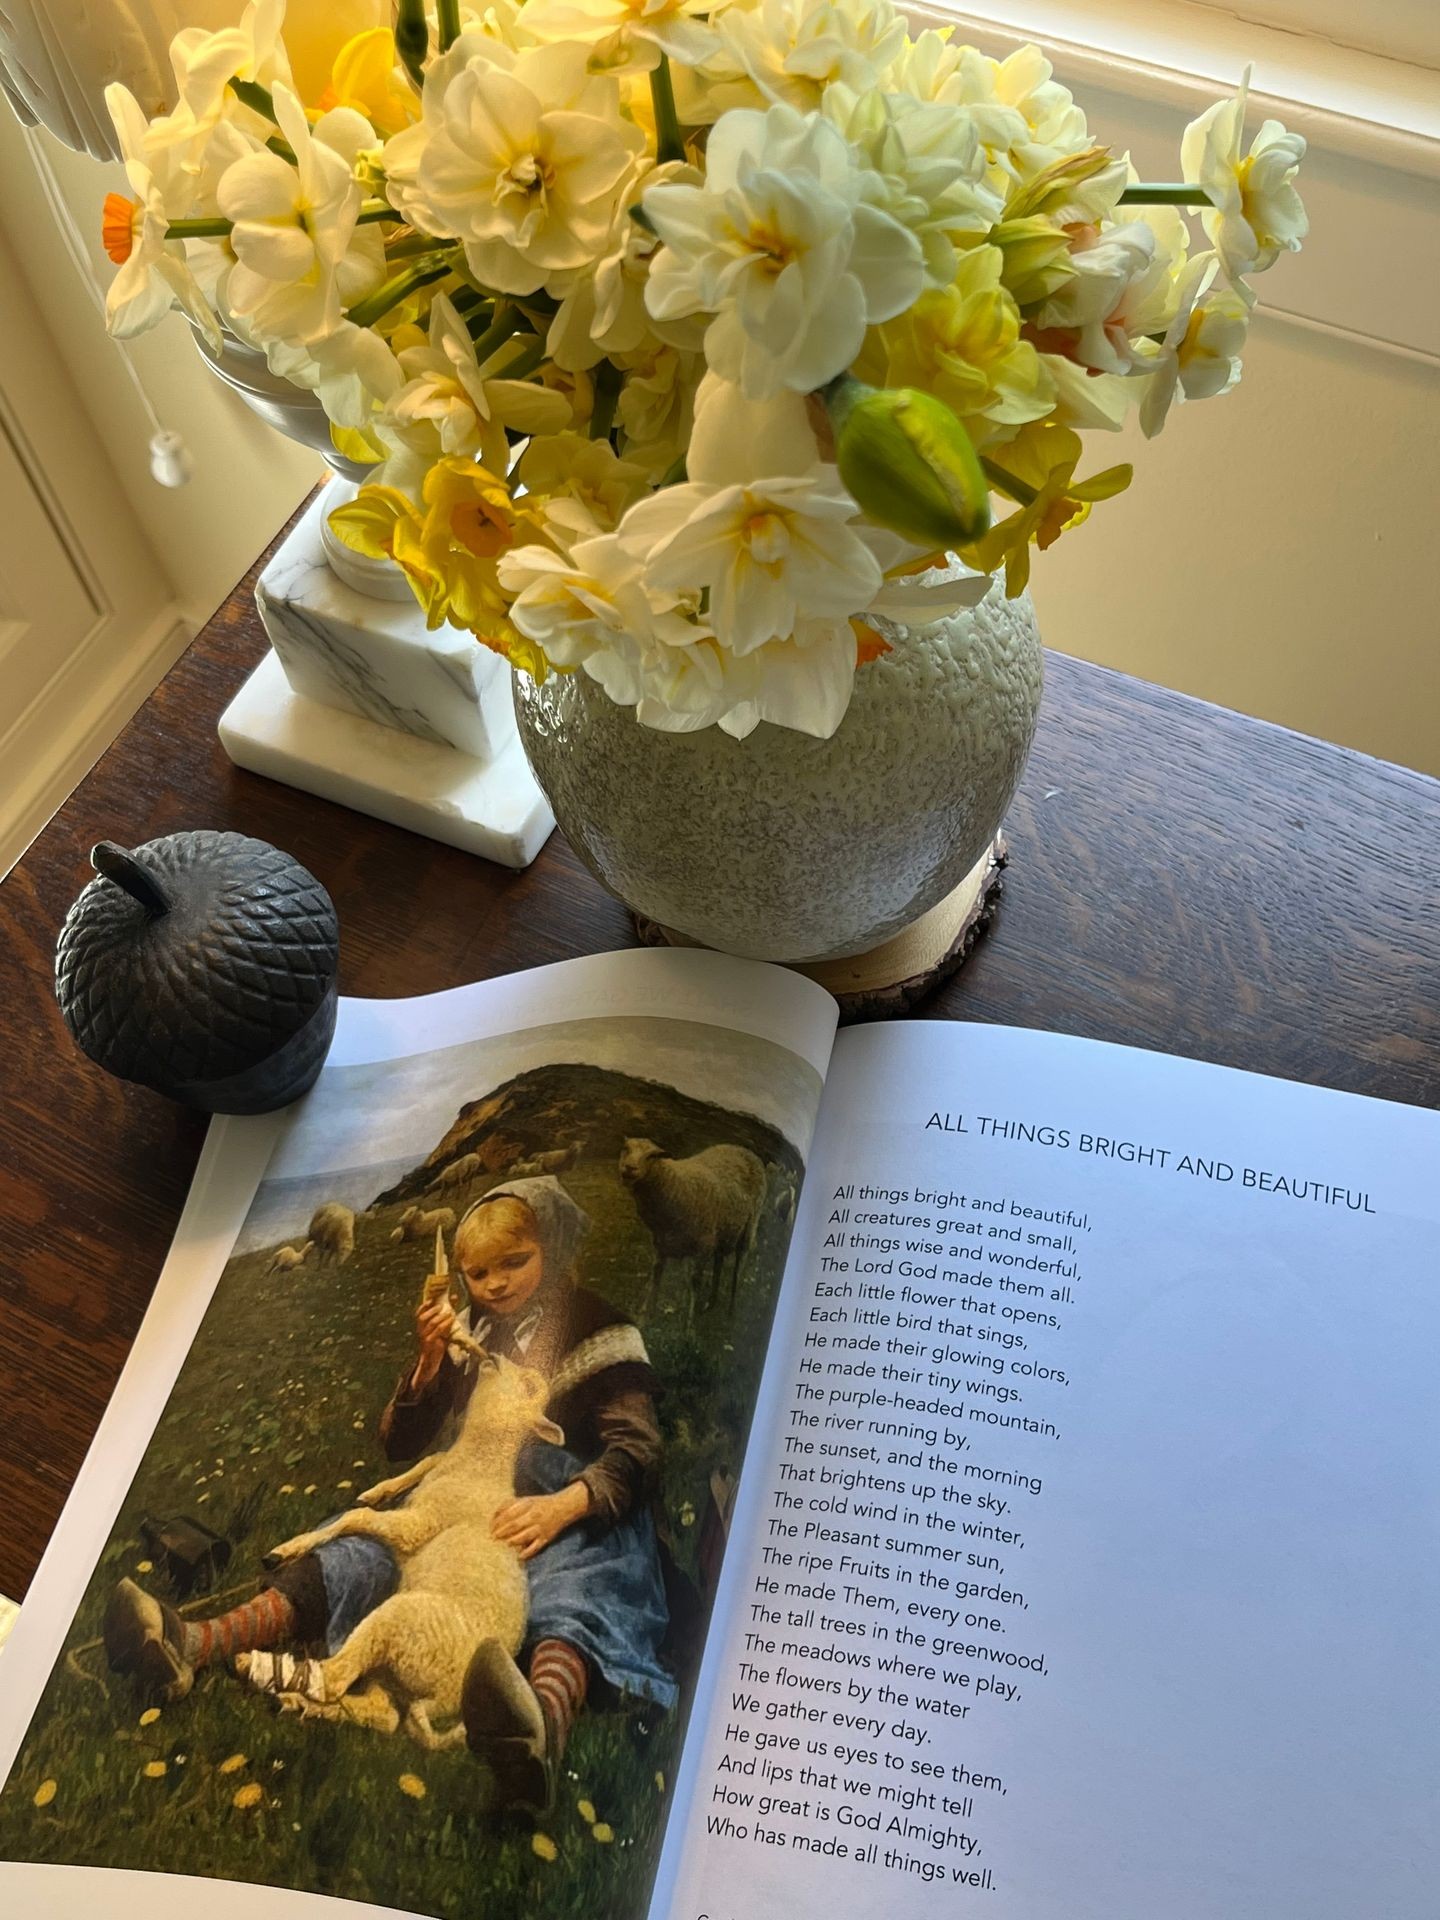 A book of Hymns for people living with Alzheimer’s dementia, featuring a little girl feeding a lamb. There is an alabaster lamp and a vase full of daffodils and jonquils. Memory care books for people living with dementia.